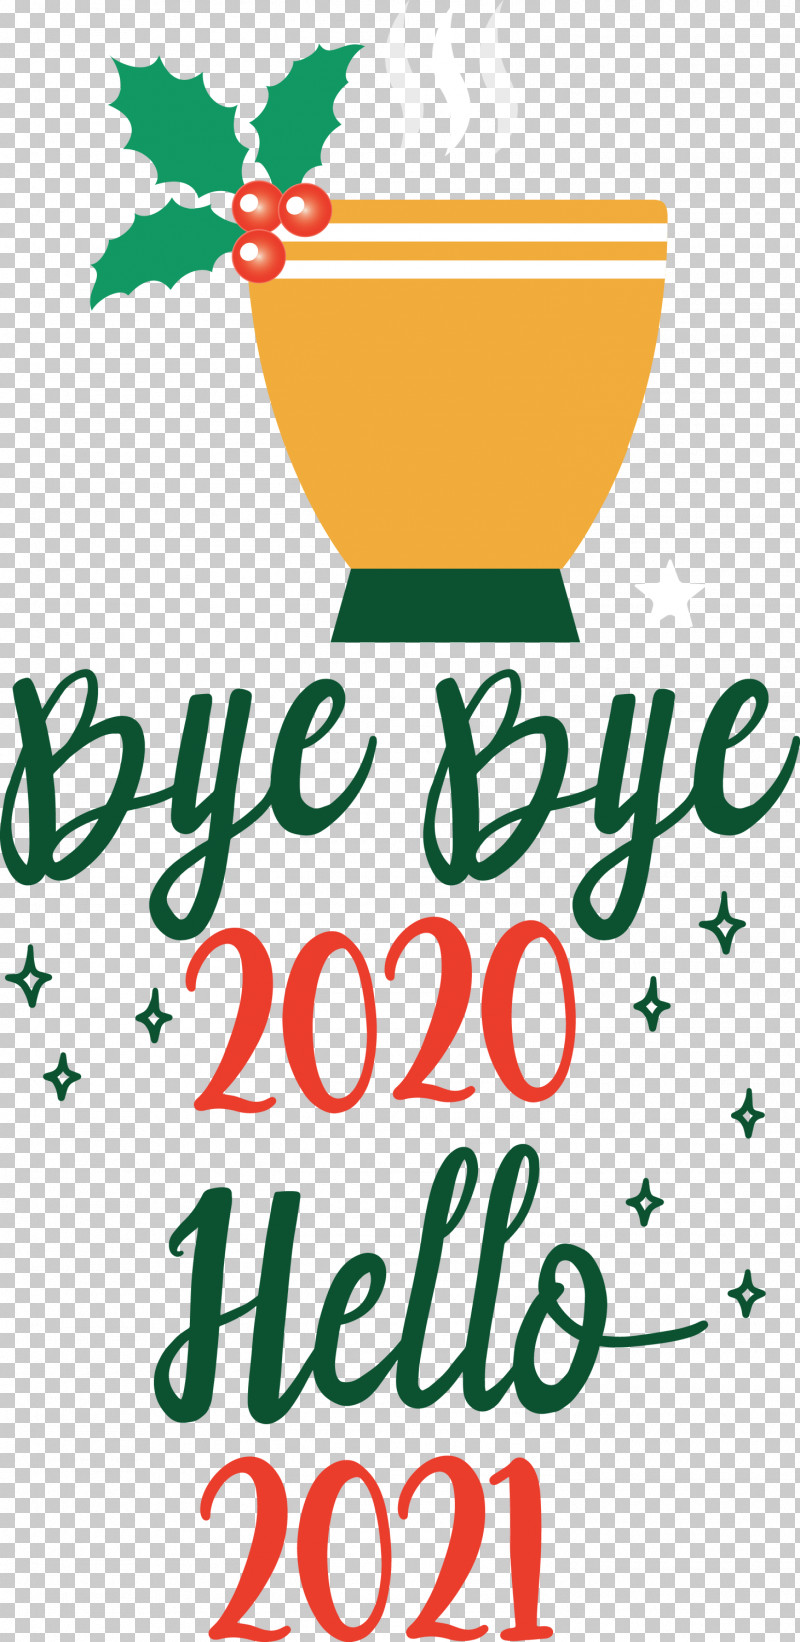 Hello 2021 Year Bye Bye 2020 Year PNG, Clipart, Bye Bye 2020 Year, Flower, Geometry, Hello 2021 Year, Line Free PNG Download